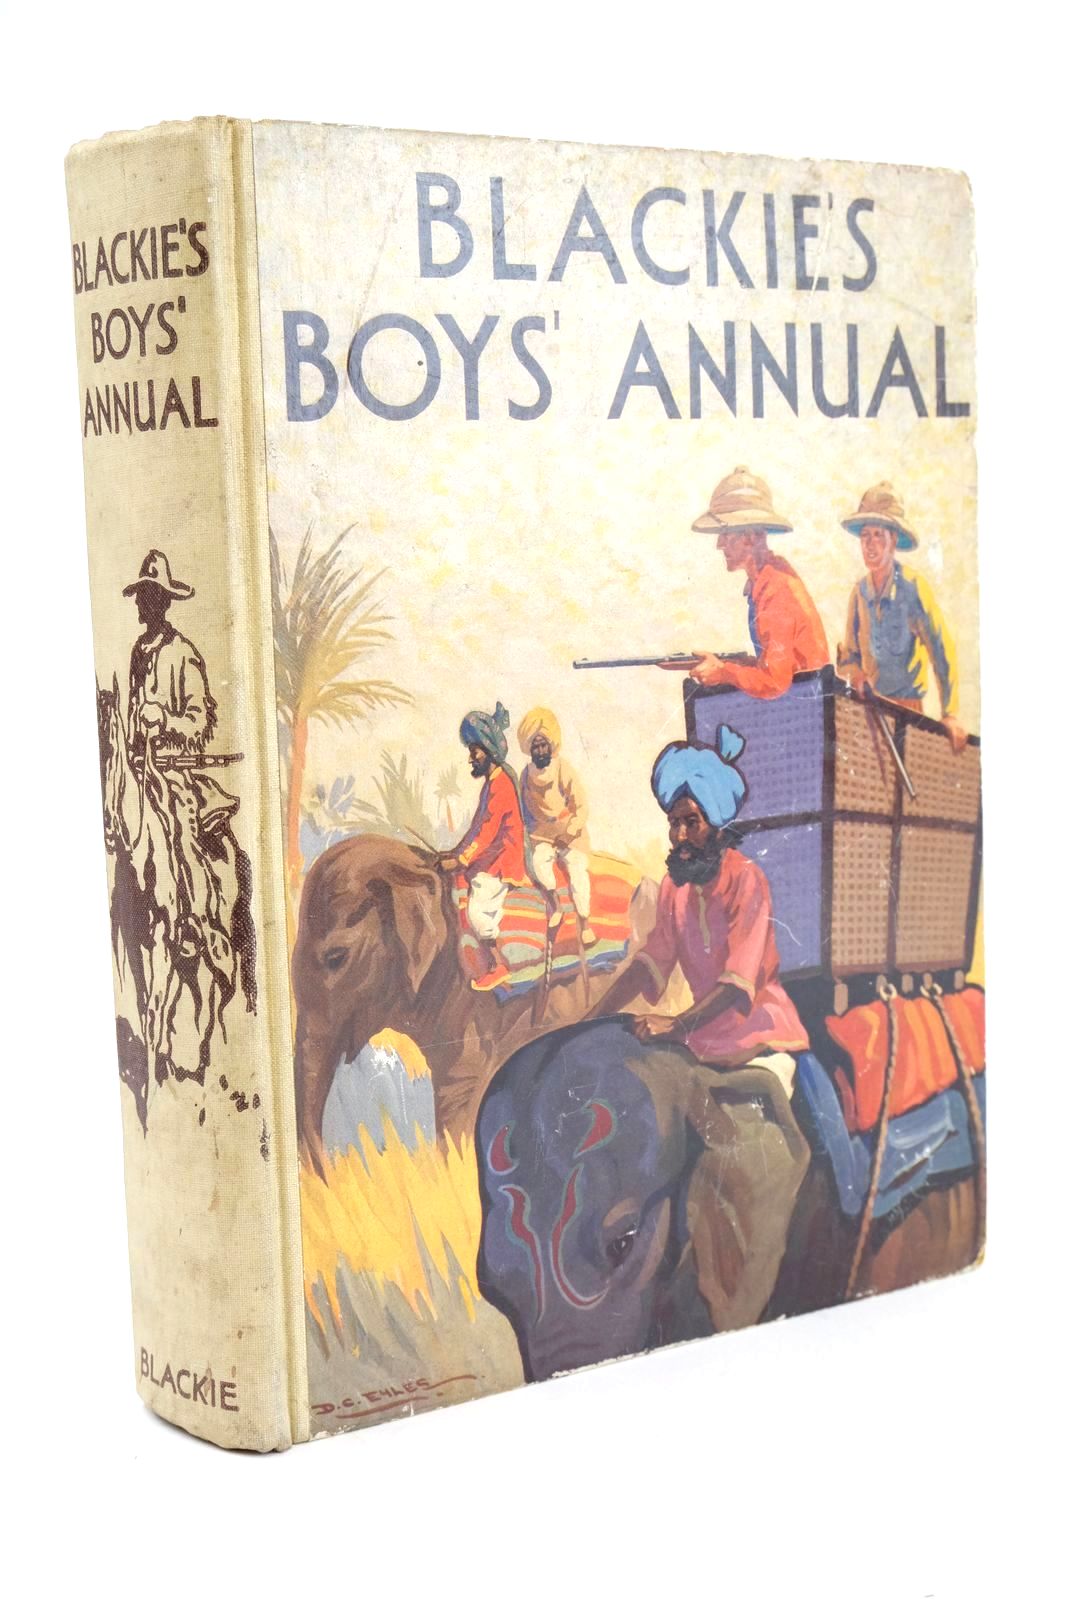 Photo of BLACKIE'S BOYS' ANNUAL written by Gorman, Major J.T. Westerman, Percy F. et al, illustrated by Eyles, D.C. Cuneo, et al., published by Blackie &amp; Son Ltd. (STOCK CODE: 1324778)  for sale by Stella & Rose's Books